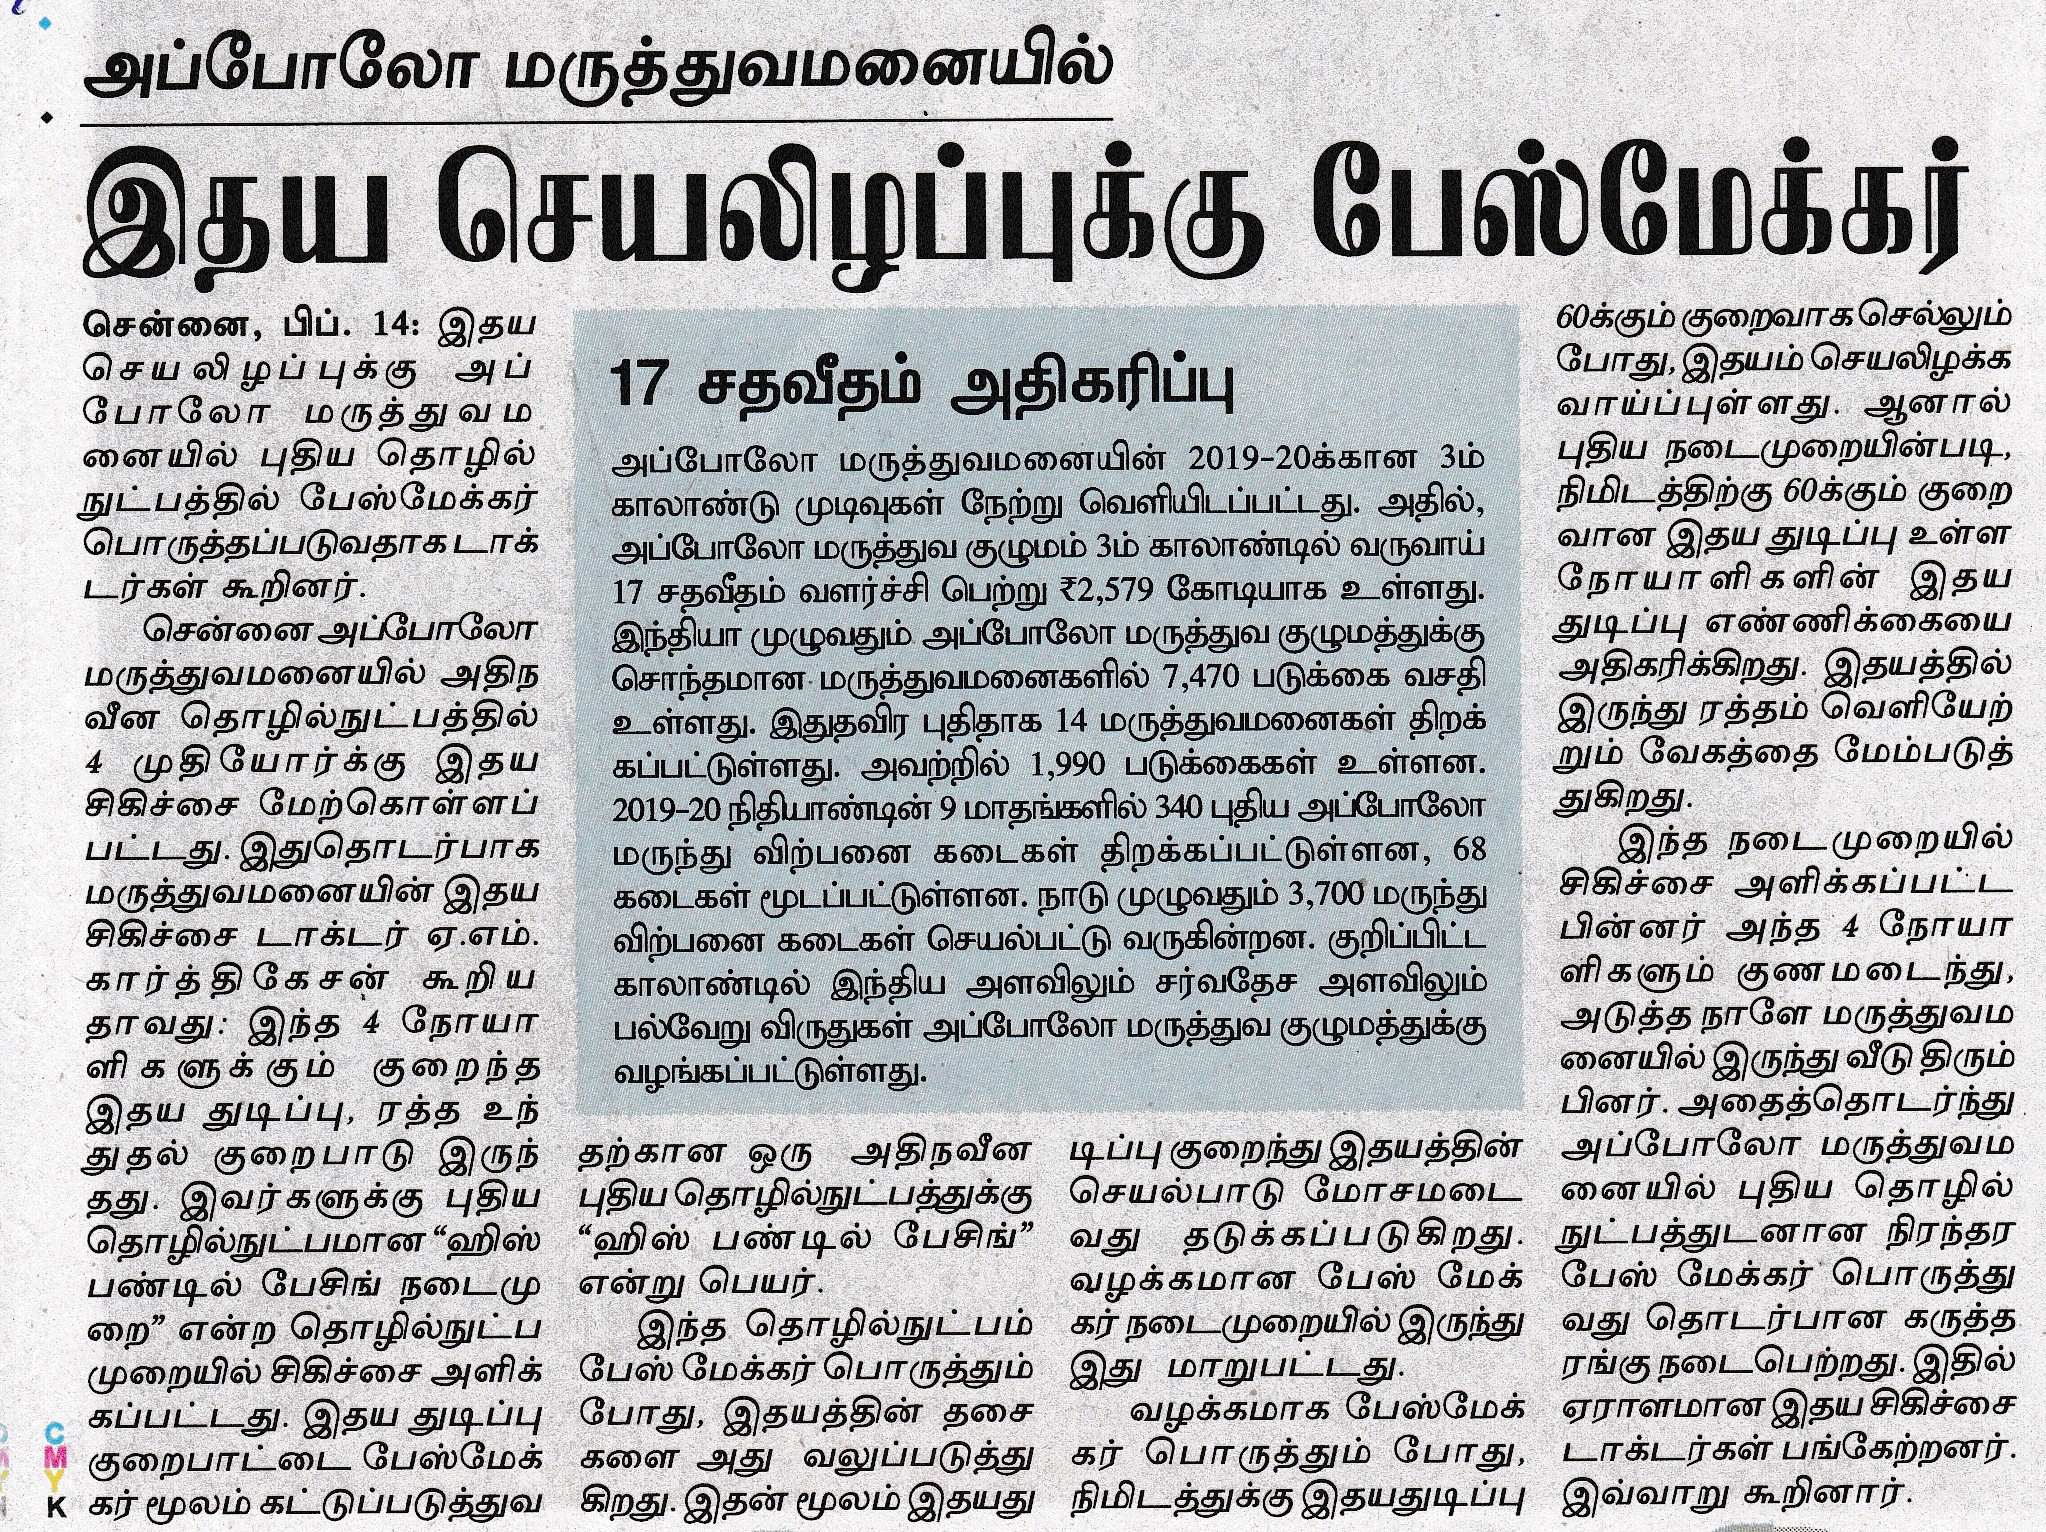 Image of a Tamil news article about pacemakers.